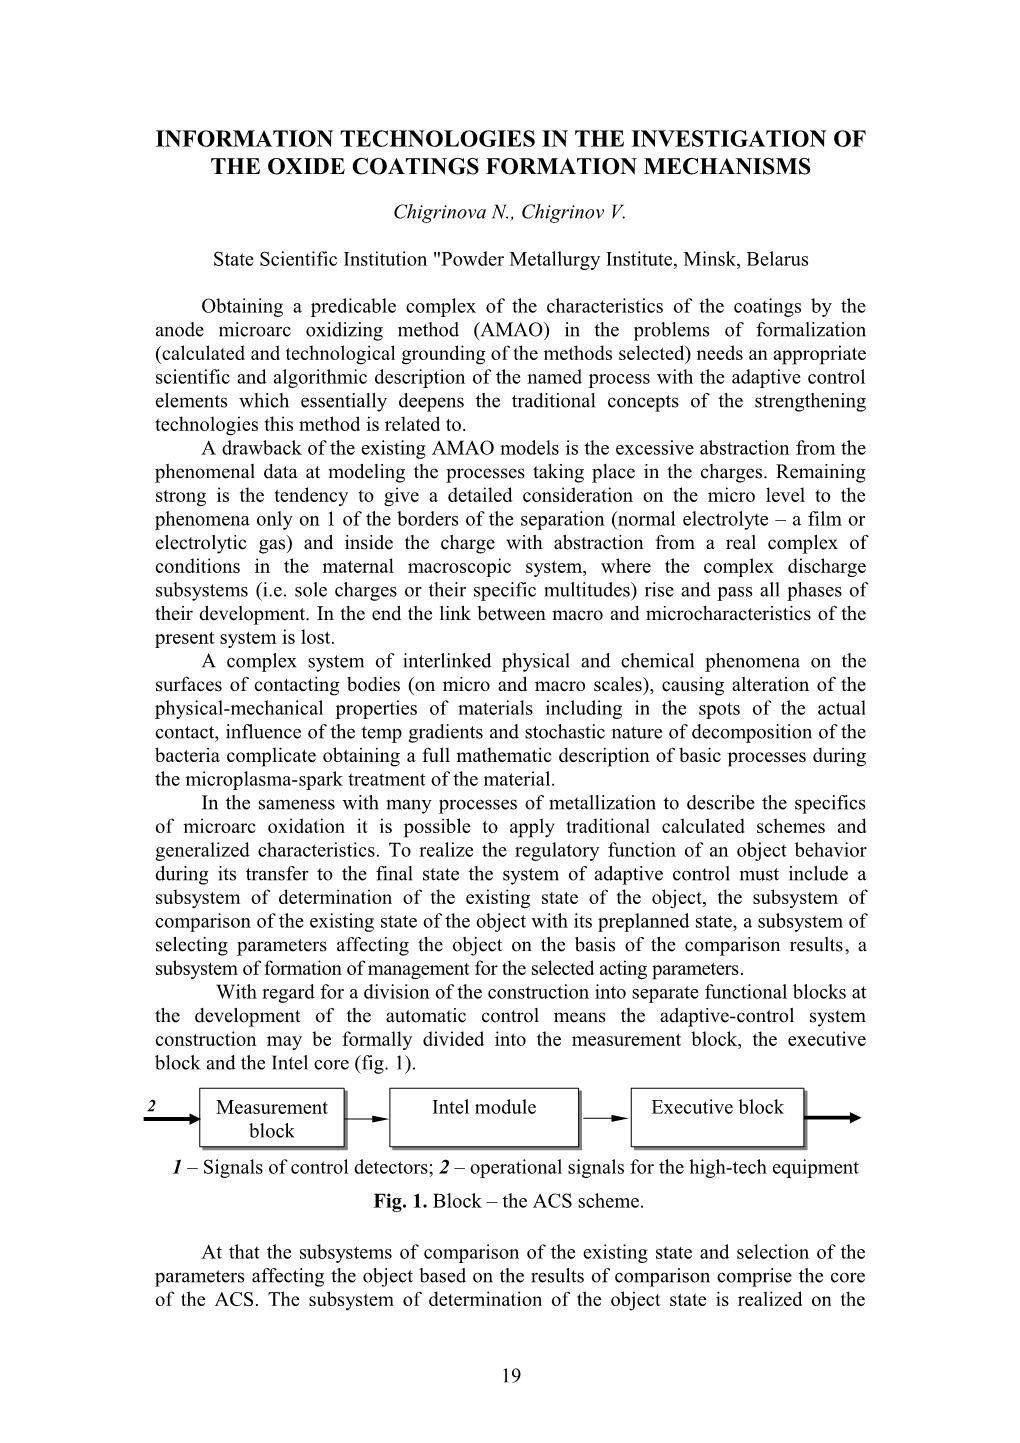 Information Technologies in the Investigation of the Oxide Coatings Formation Mechanisms